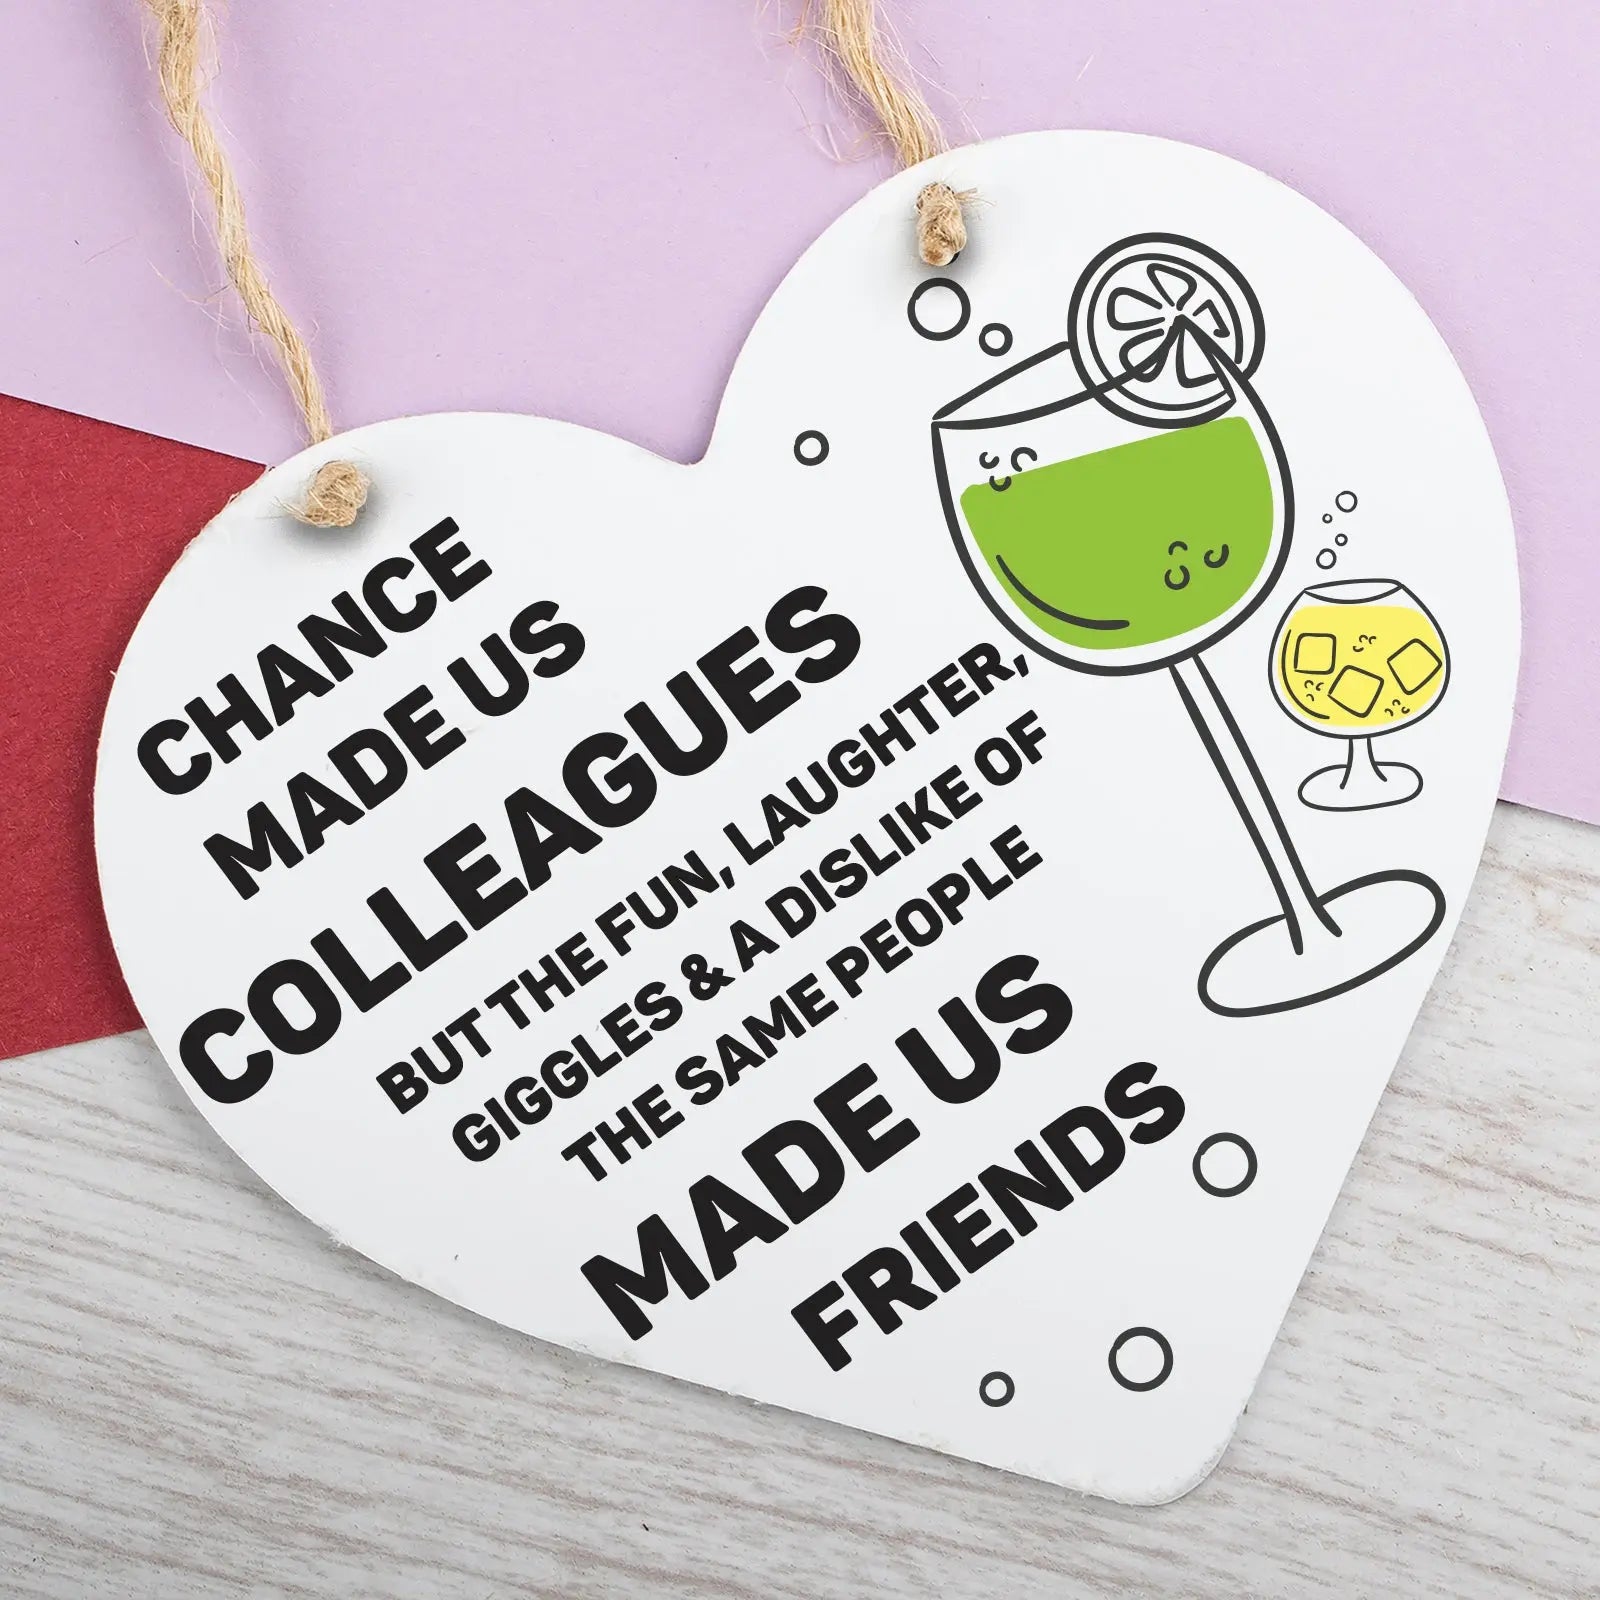 Chance Made Us Colleagues Gifts Heart Plaque Hanging Sign Friendship Friends